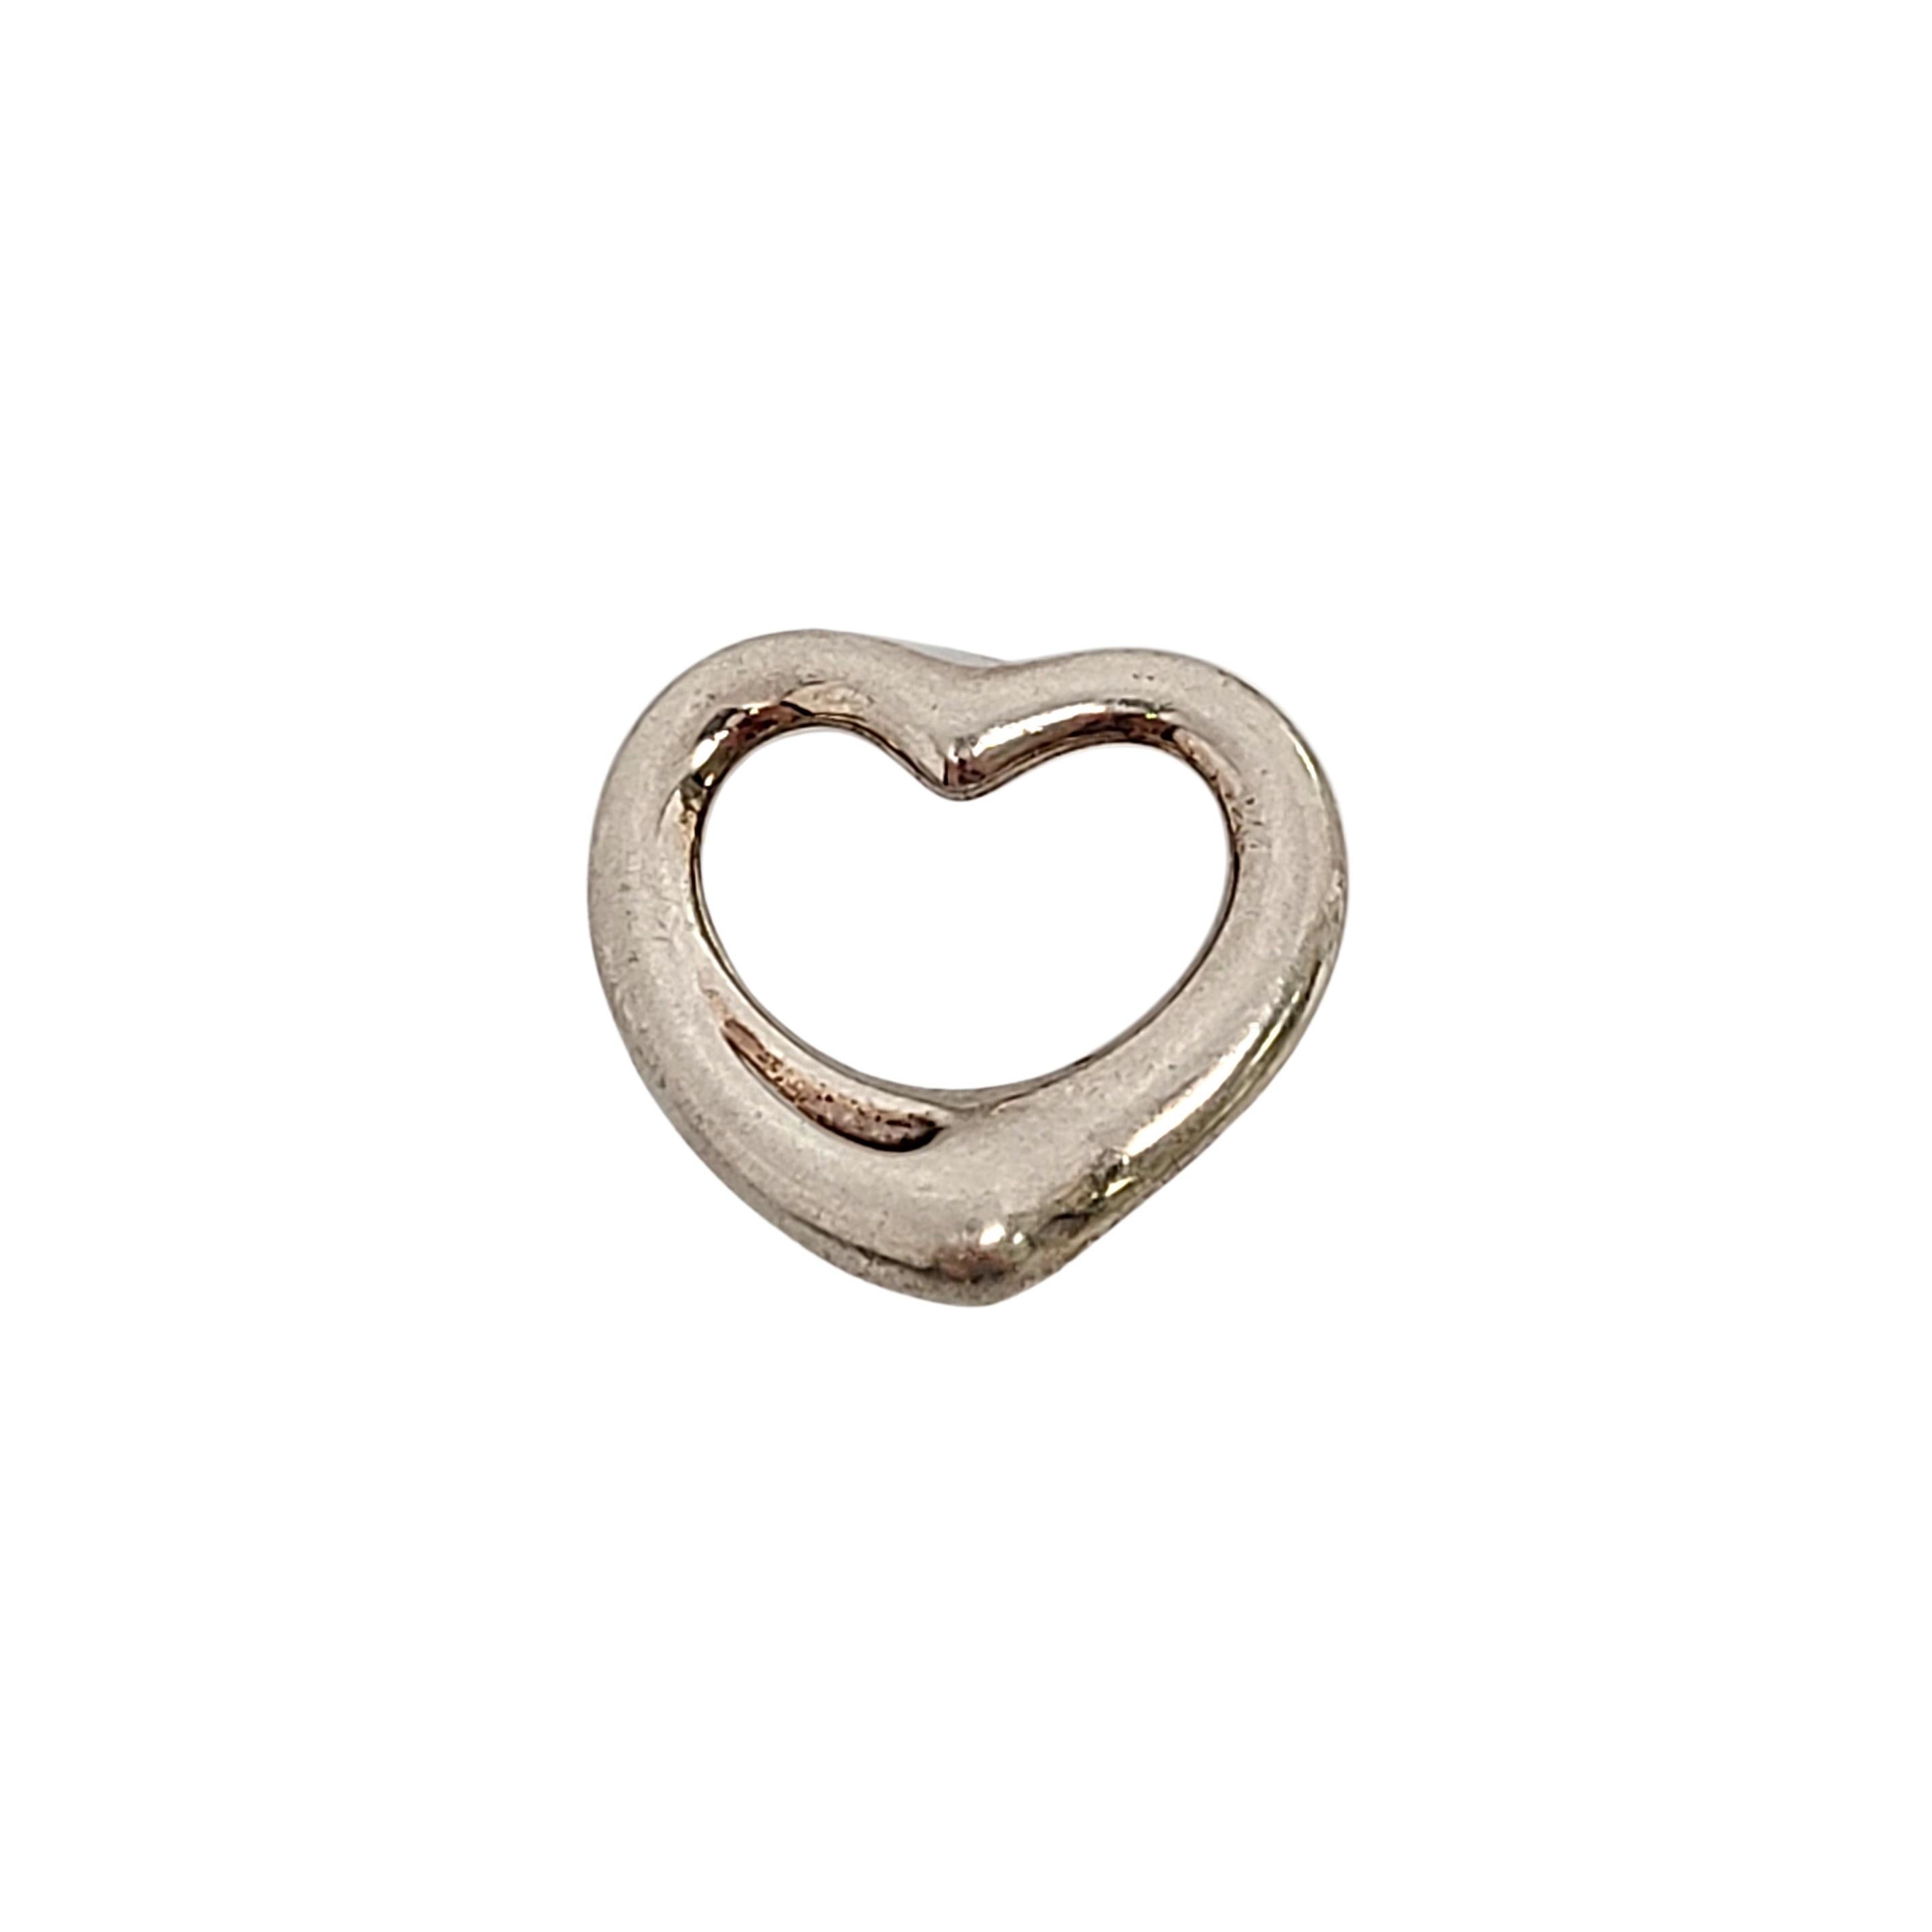 Tiffany & Co sterling silver Open Heart pendant by Elsa Peretti.

An authentic Tiffany & Co sterling silver pendant in Elsa Peretti's timeless signature open heart design. Tiffany pouch and box not included.

Measures approx 3/4